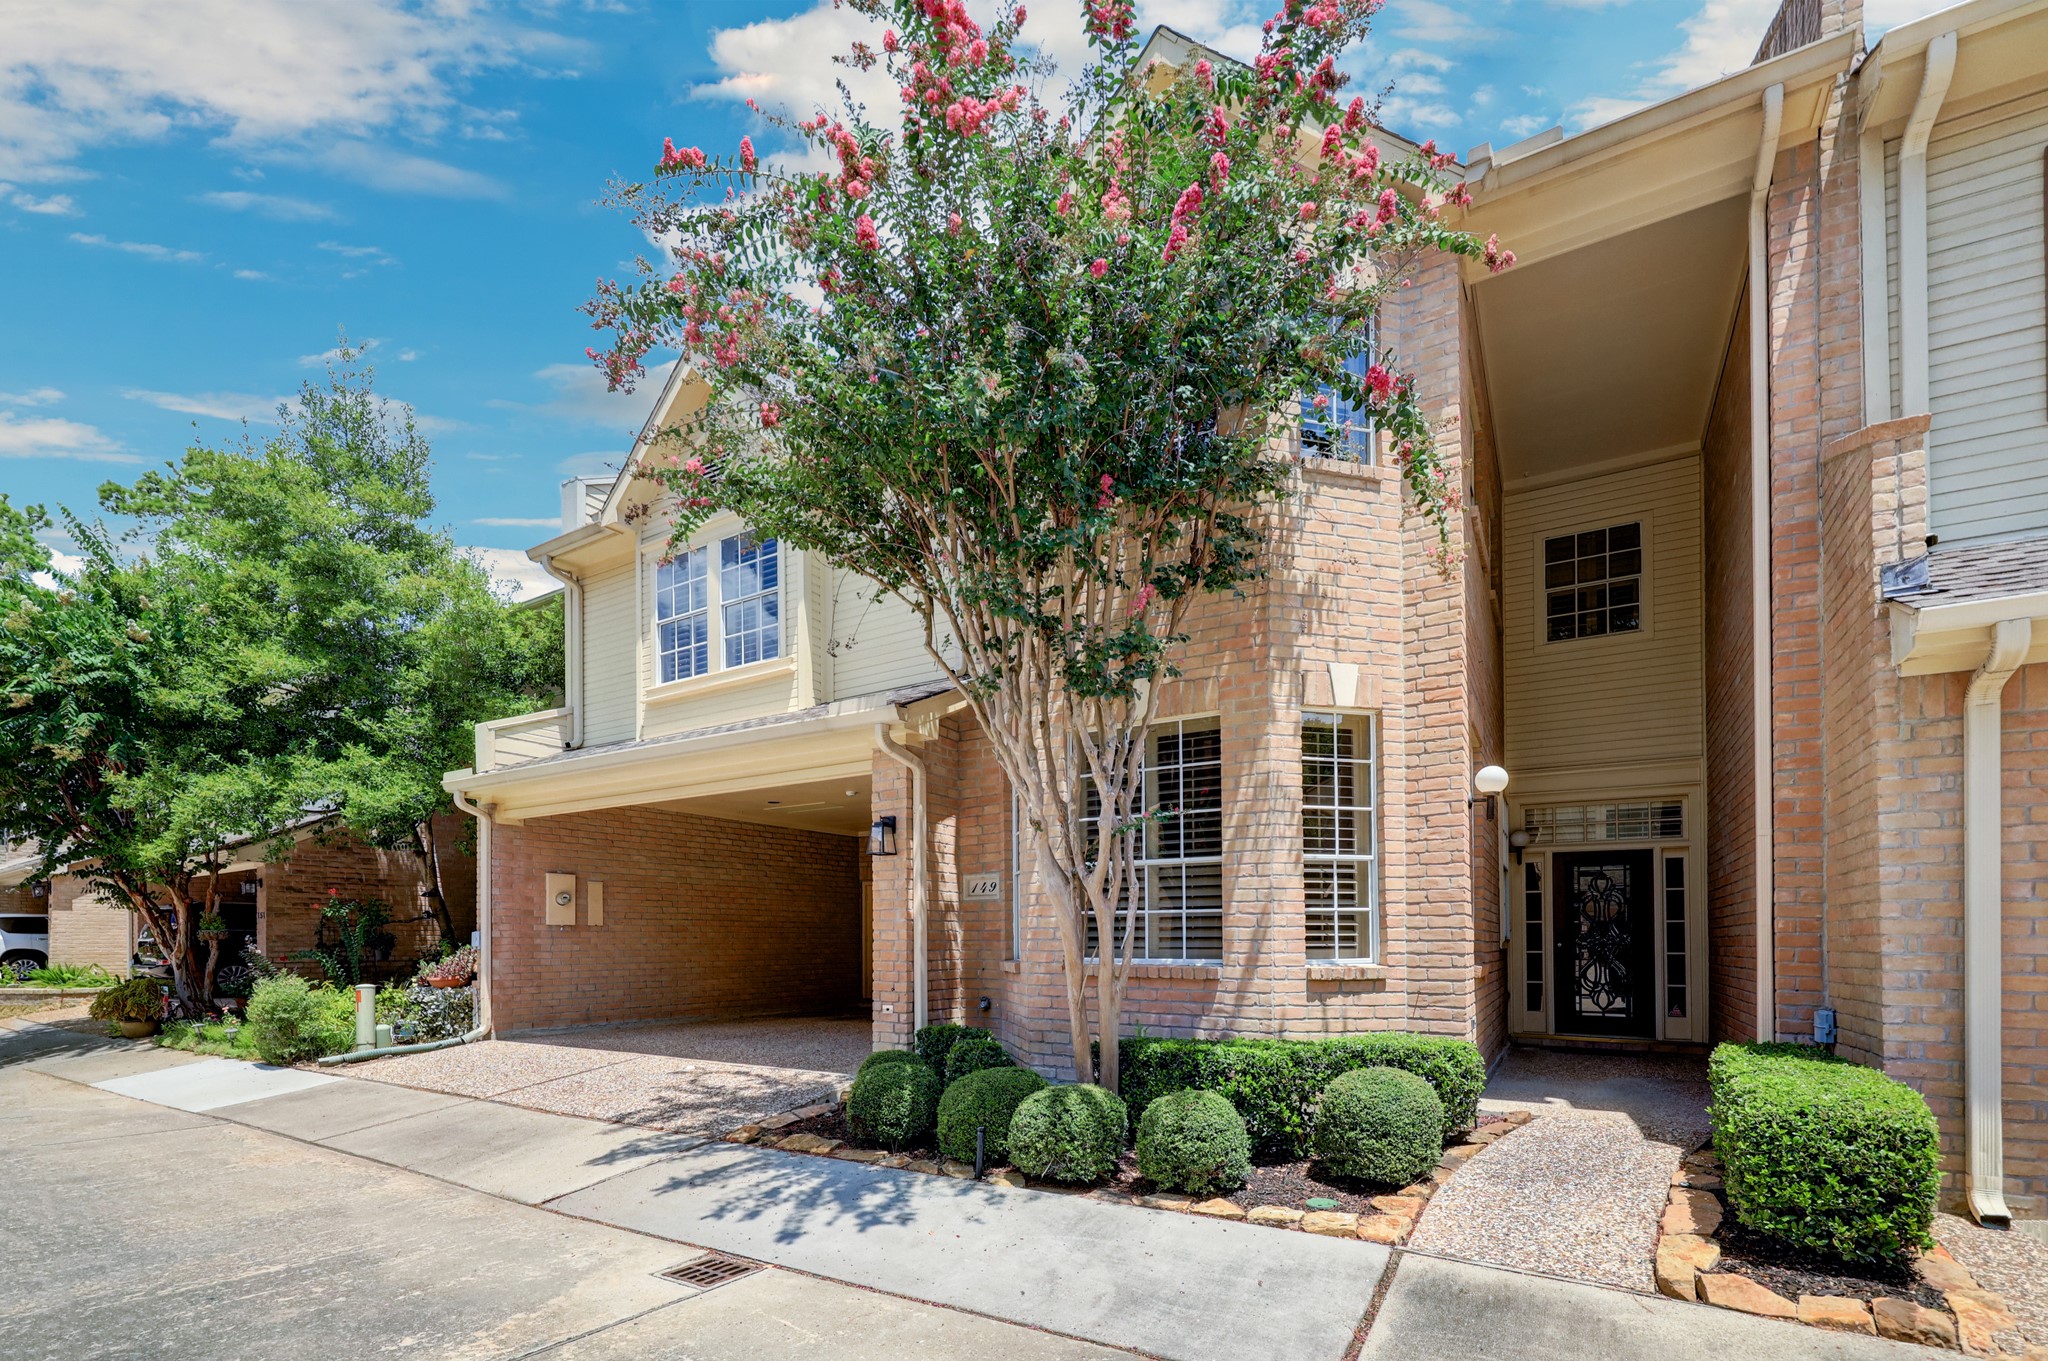 Welcome home to 201 Vanderpool Ln #149, a wonderful 3-bedroom home in the gated community of Woodstone in Memorial.